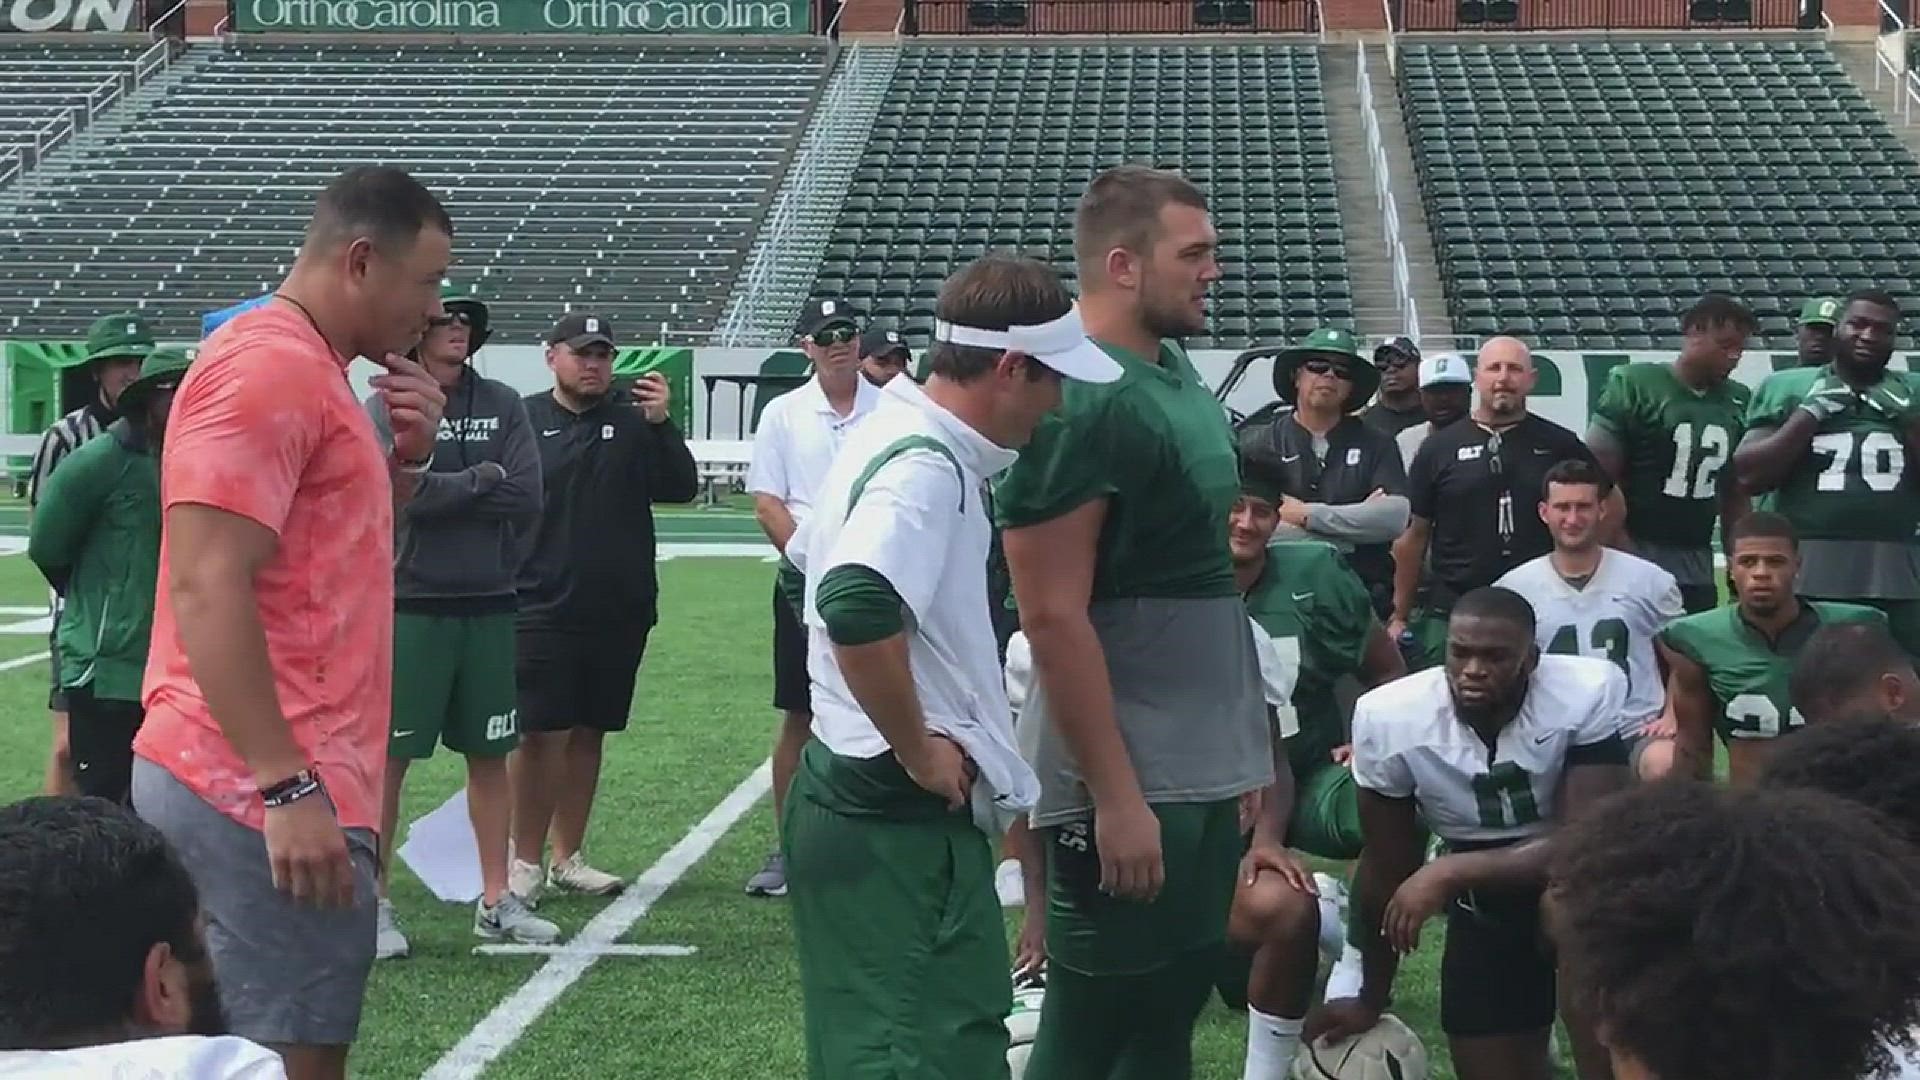 Charlotte 49ers offensive lineman Dejan Rasuo was surprised with a scholarship at practice Friday by former teammate Alex Highsmith.